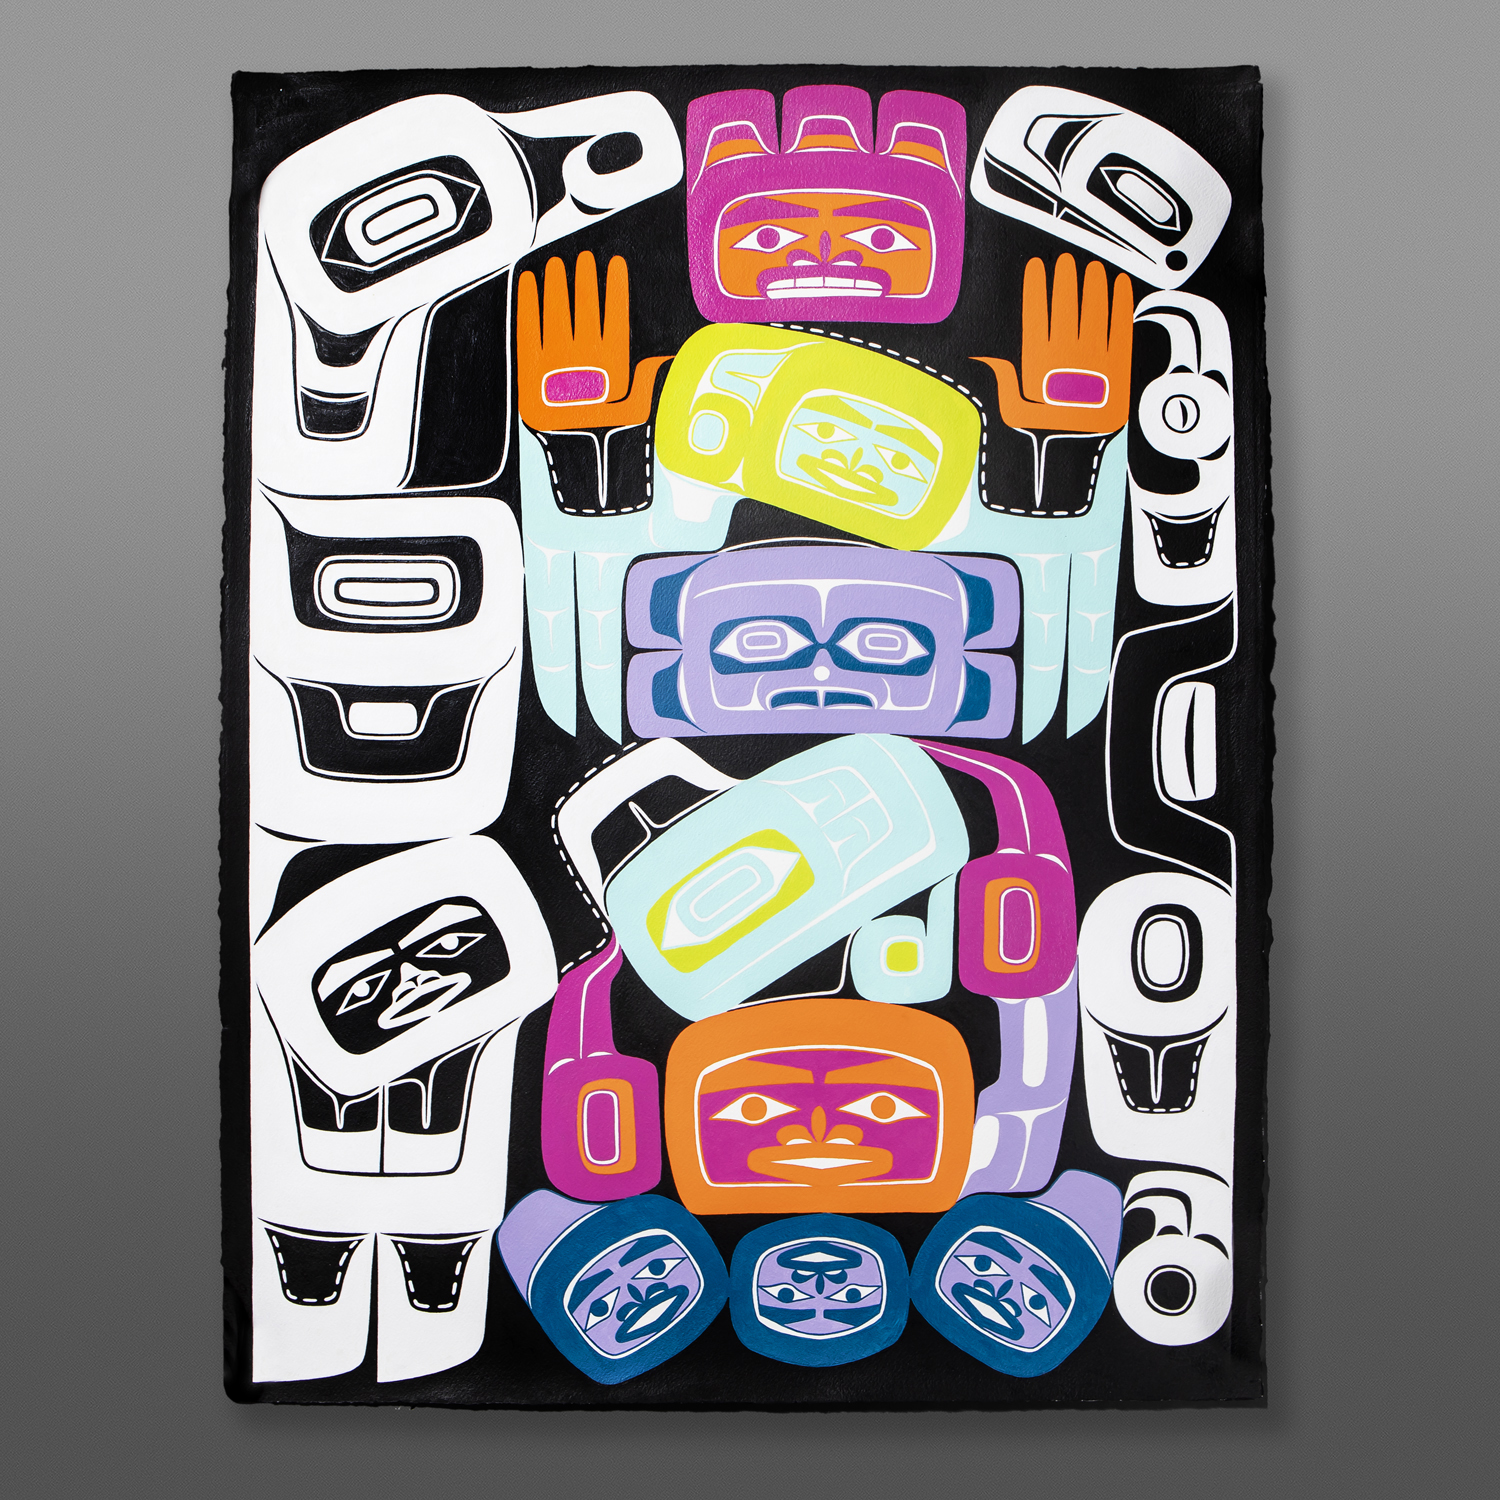 What We Take
Alison Bremner
Tlingit
Acrylic on Arches paper, unframed
30" x 22"$6000